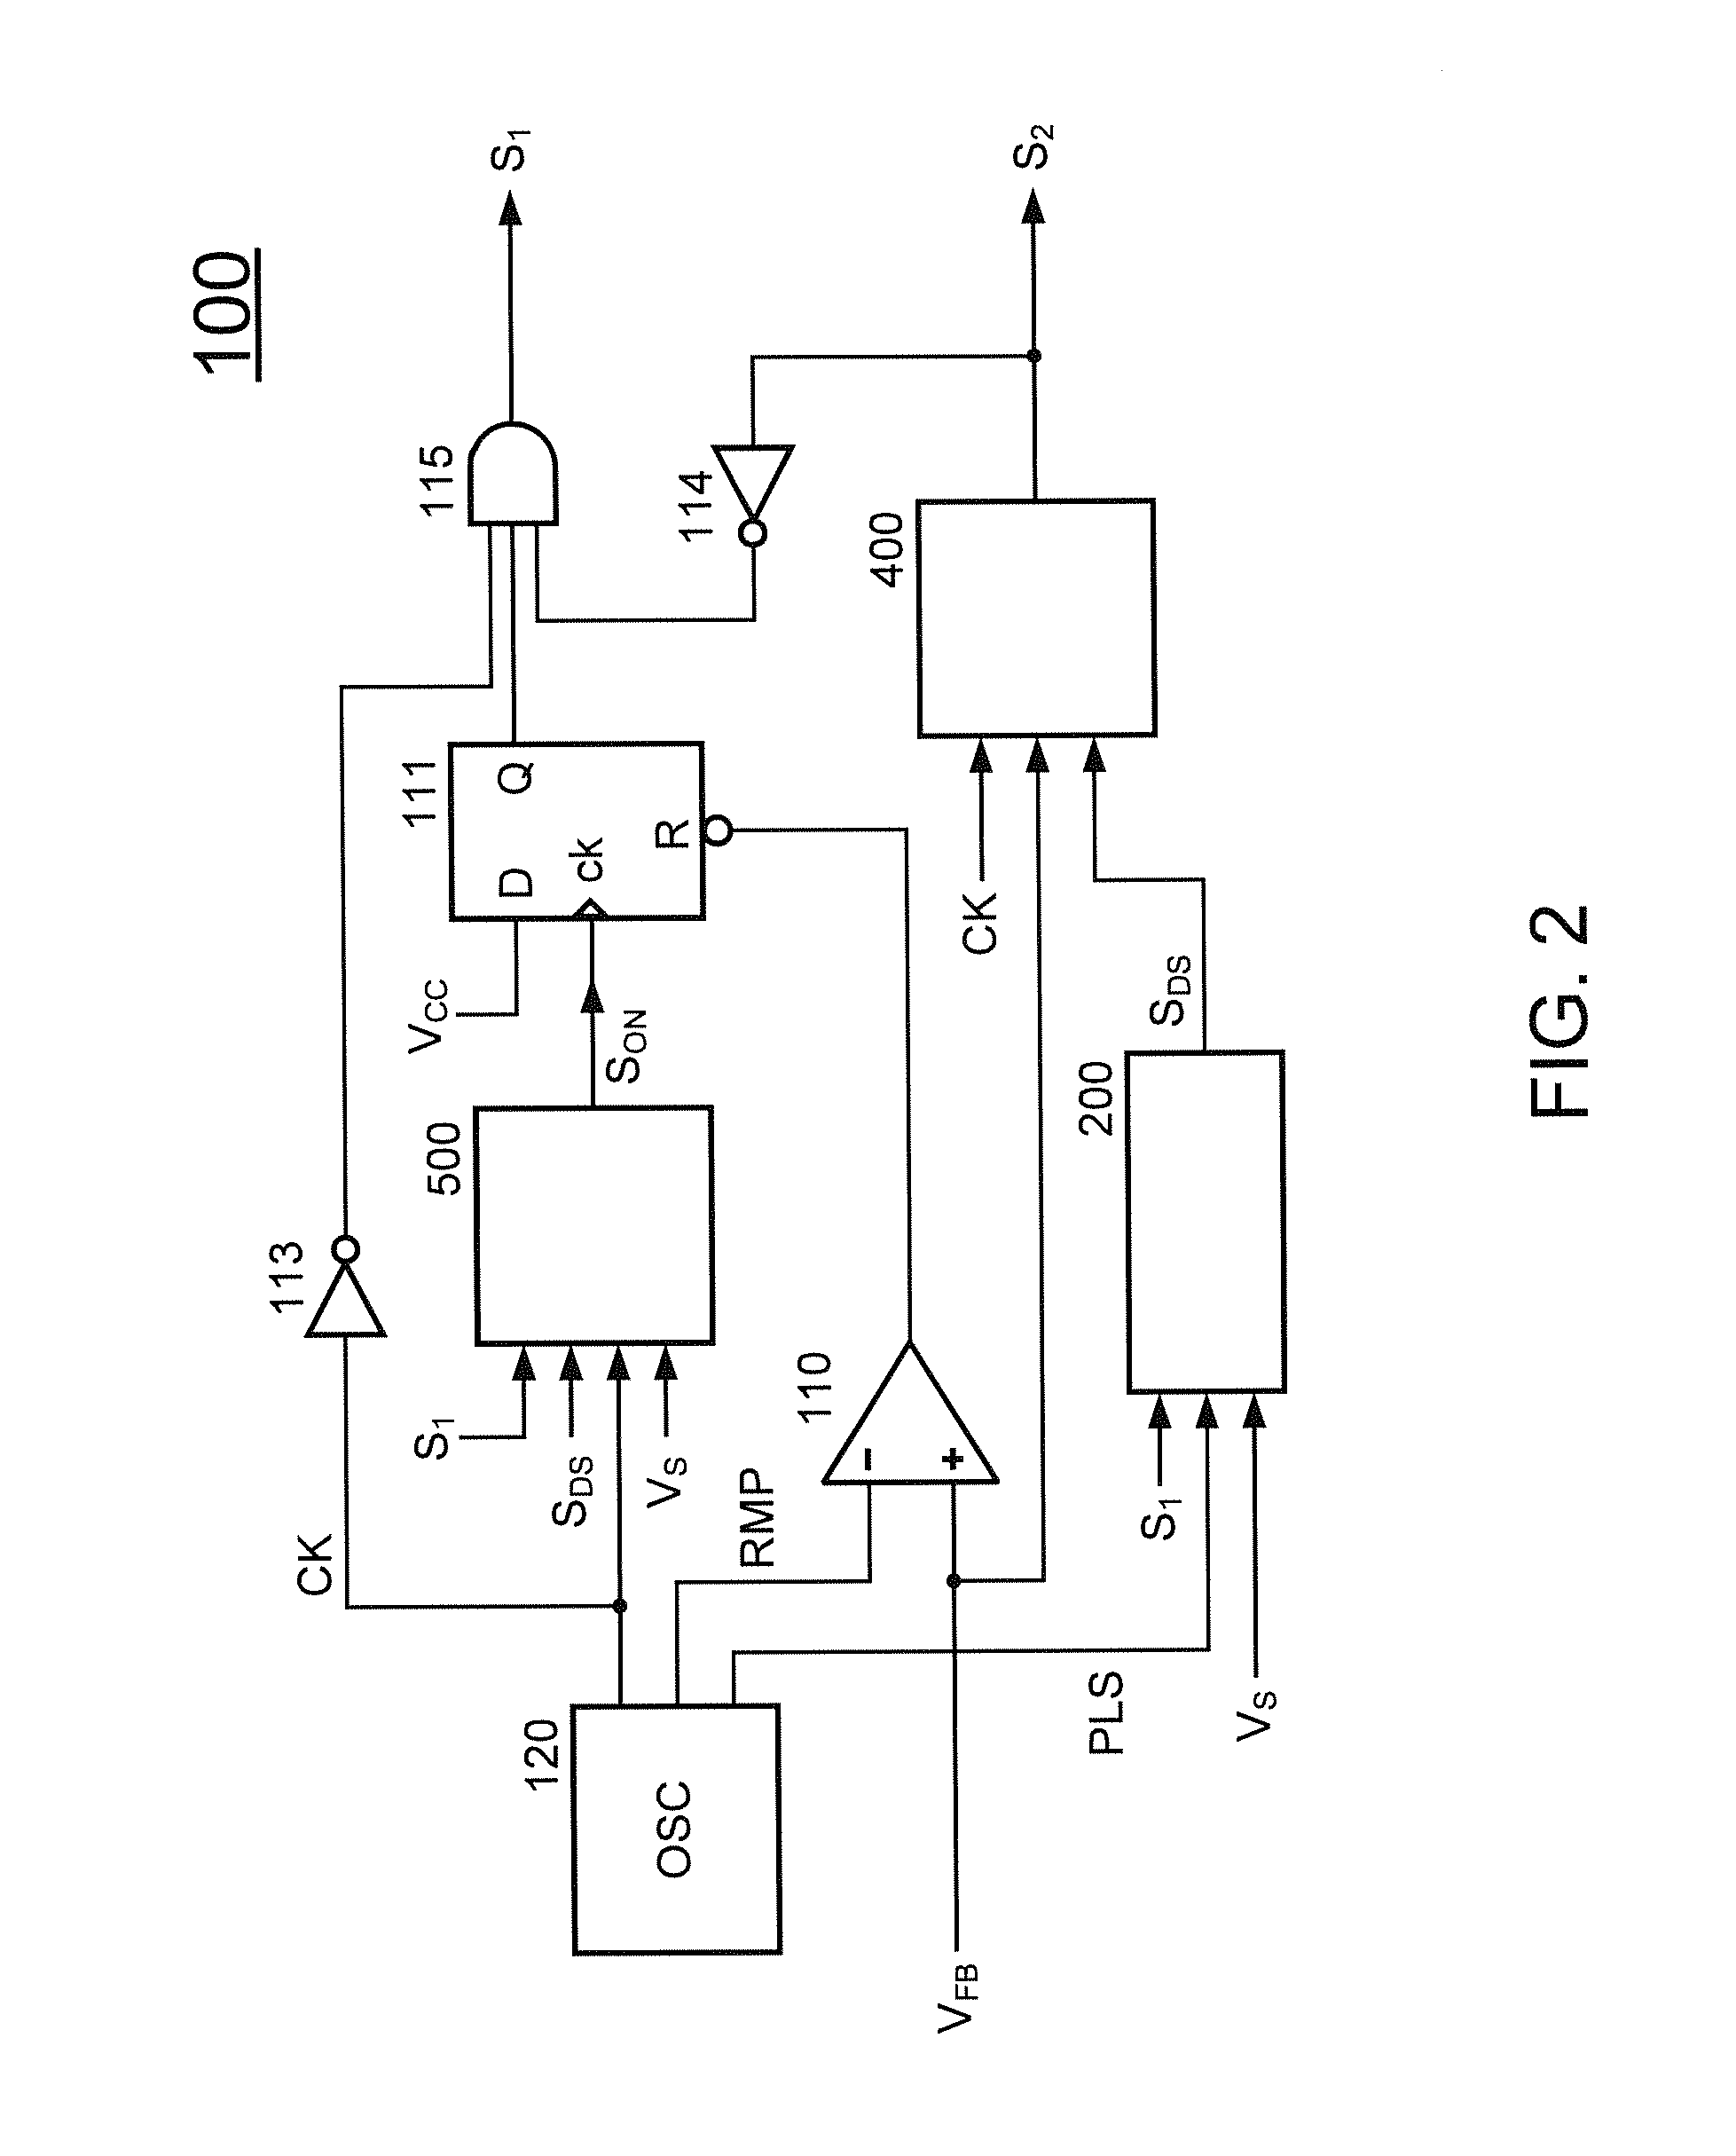 Adaptive active clamp of flyback power converter with high efficiency for heavy load and light load